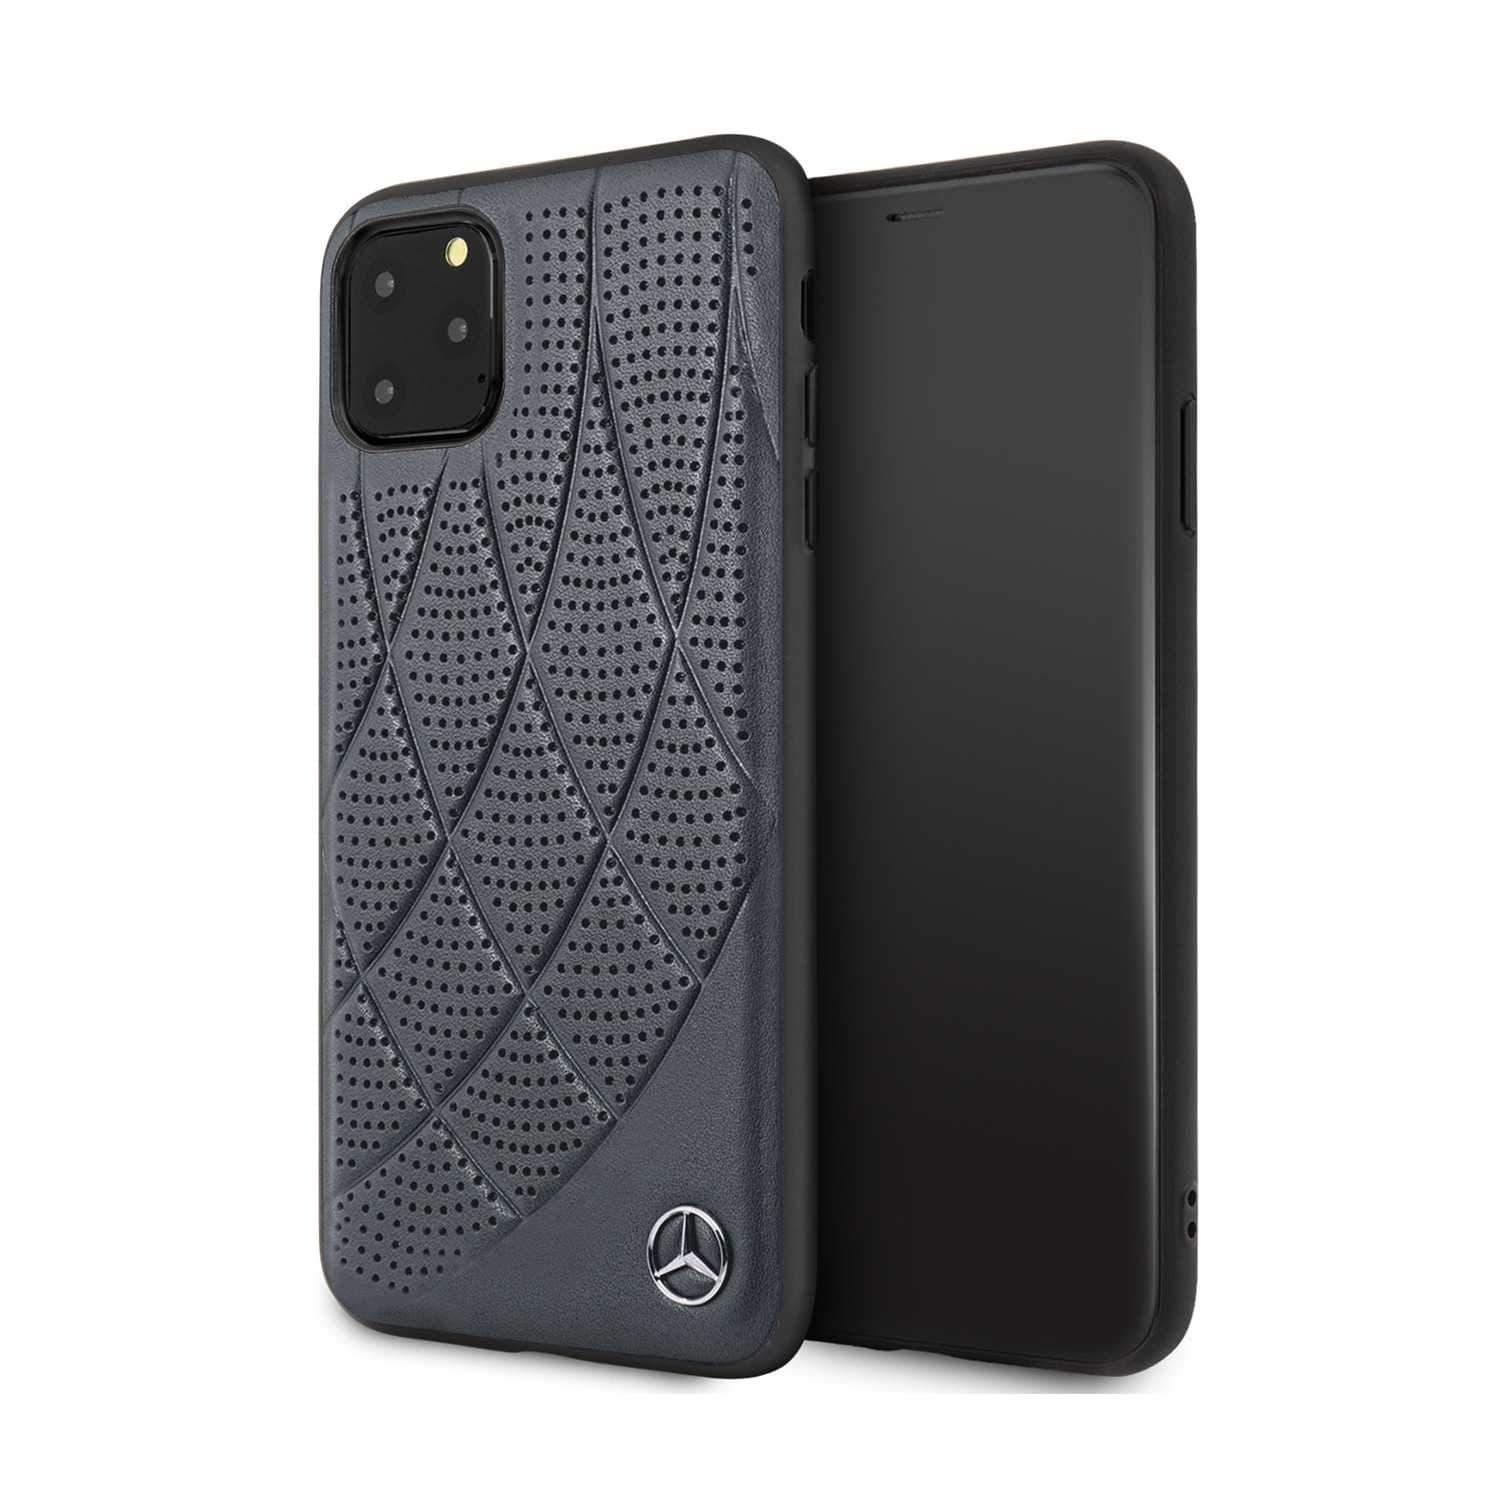 Mercedes-Benz mercedes hard case quilted perforated genuine leather iphone 11 pro max blue